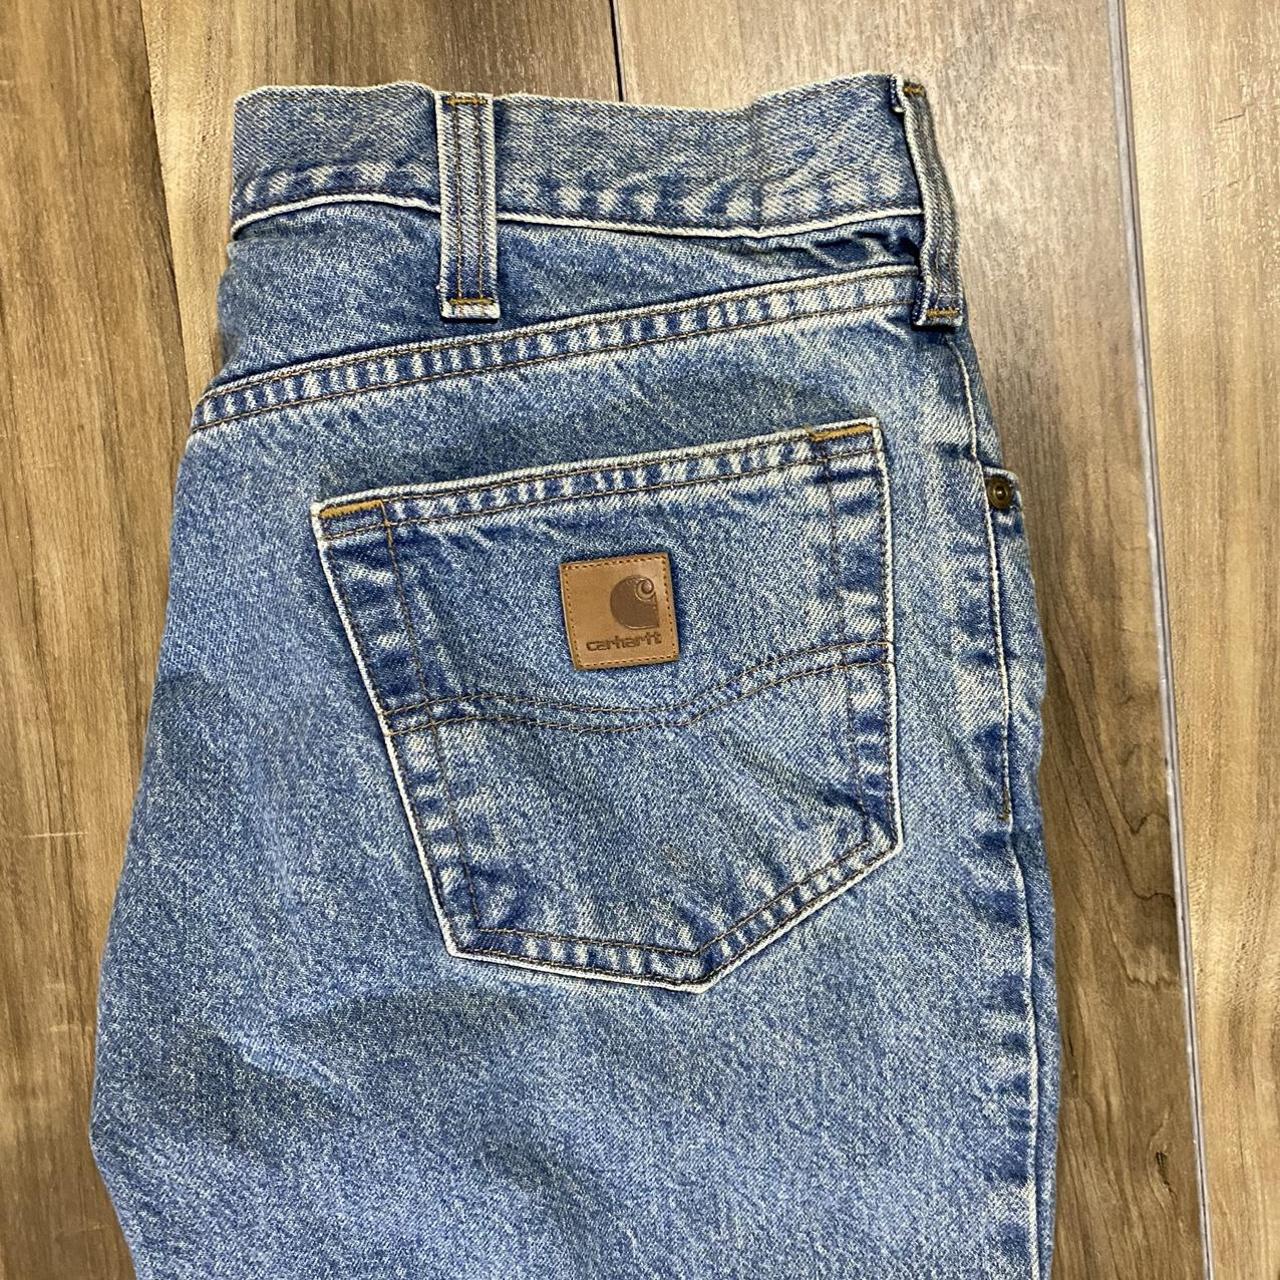 Product Image 2 - Vintage 90s Carhartt jeans! These